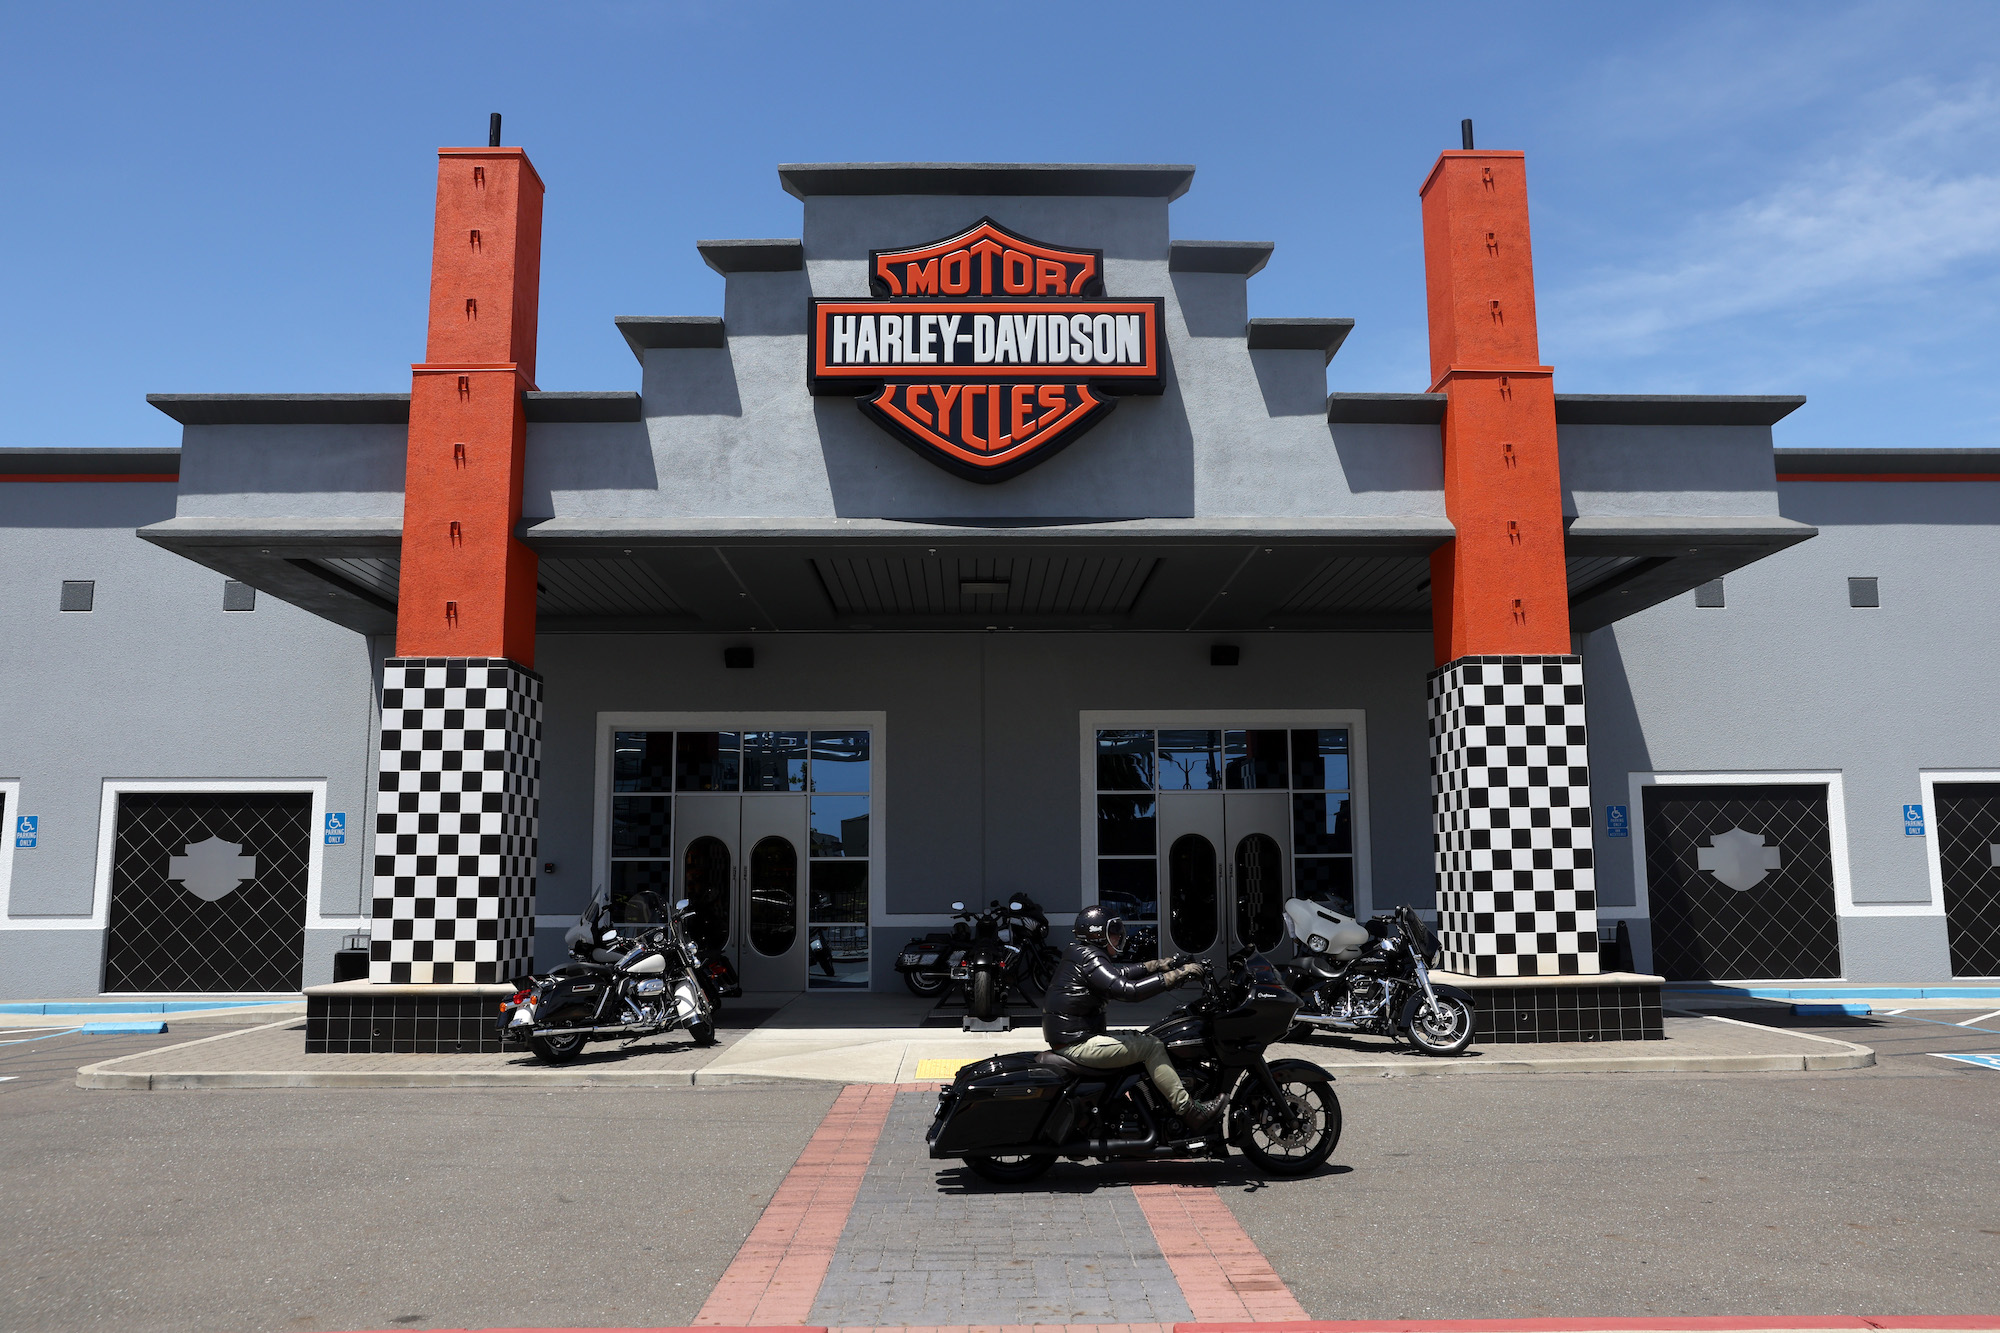 A Harley-Davidson dealership with bikes parked in front.